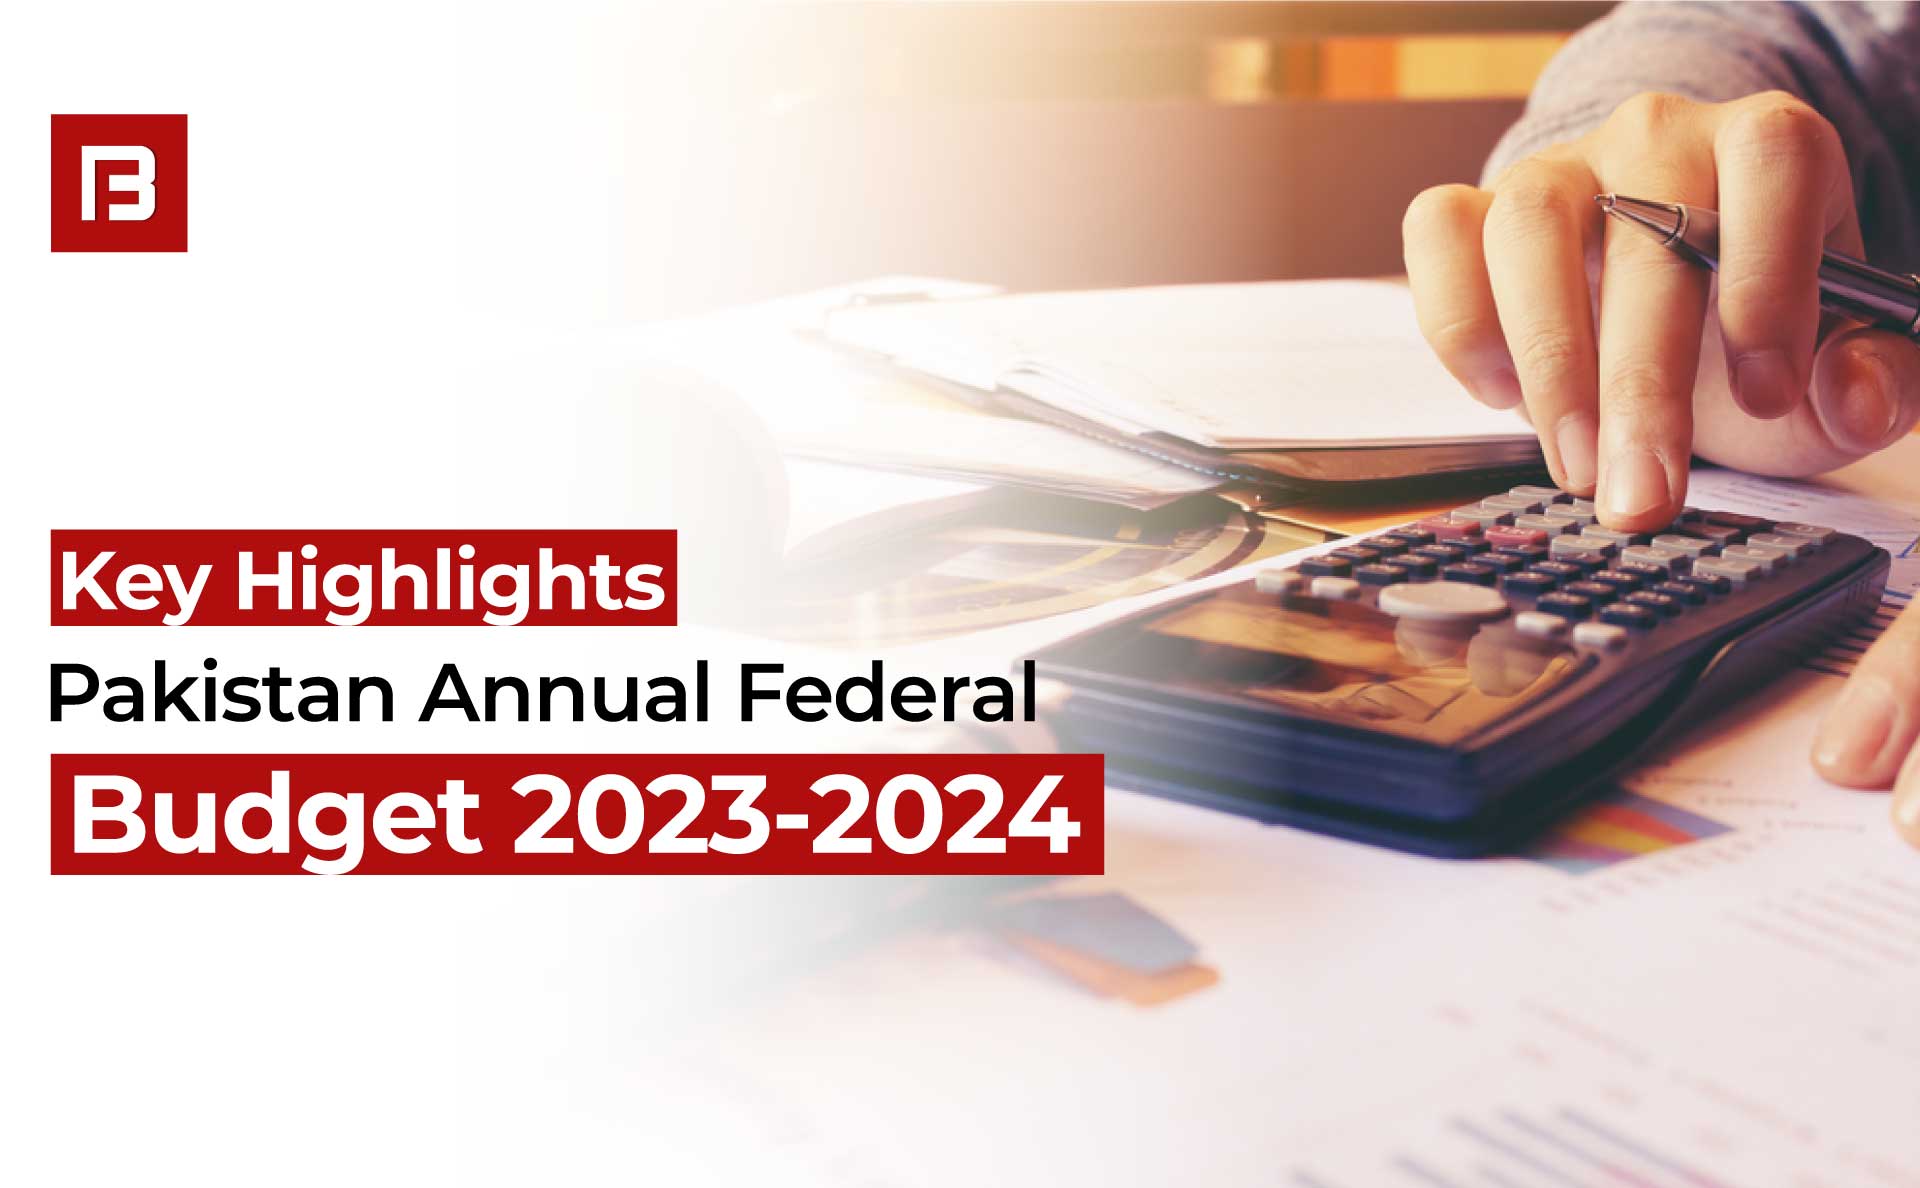 Key Highlights From Pakistan’s Annual Federal Budget 2023-2024